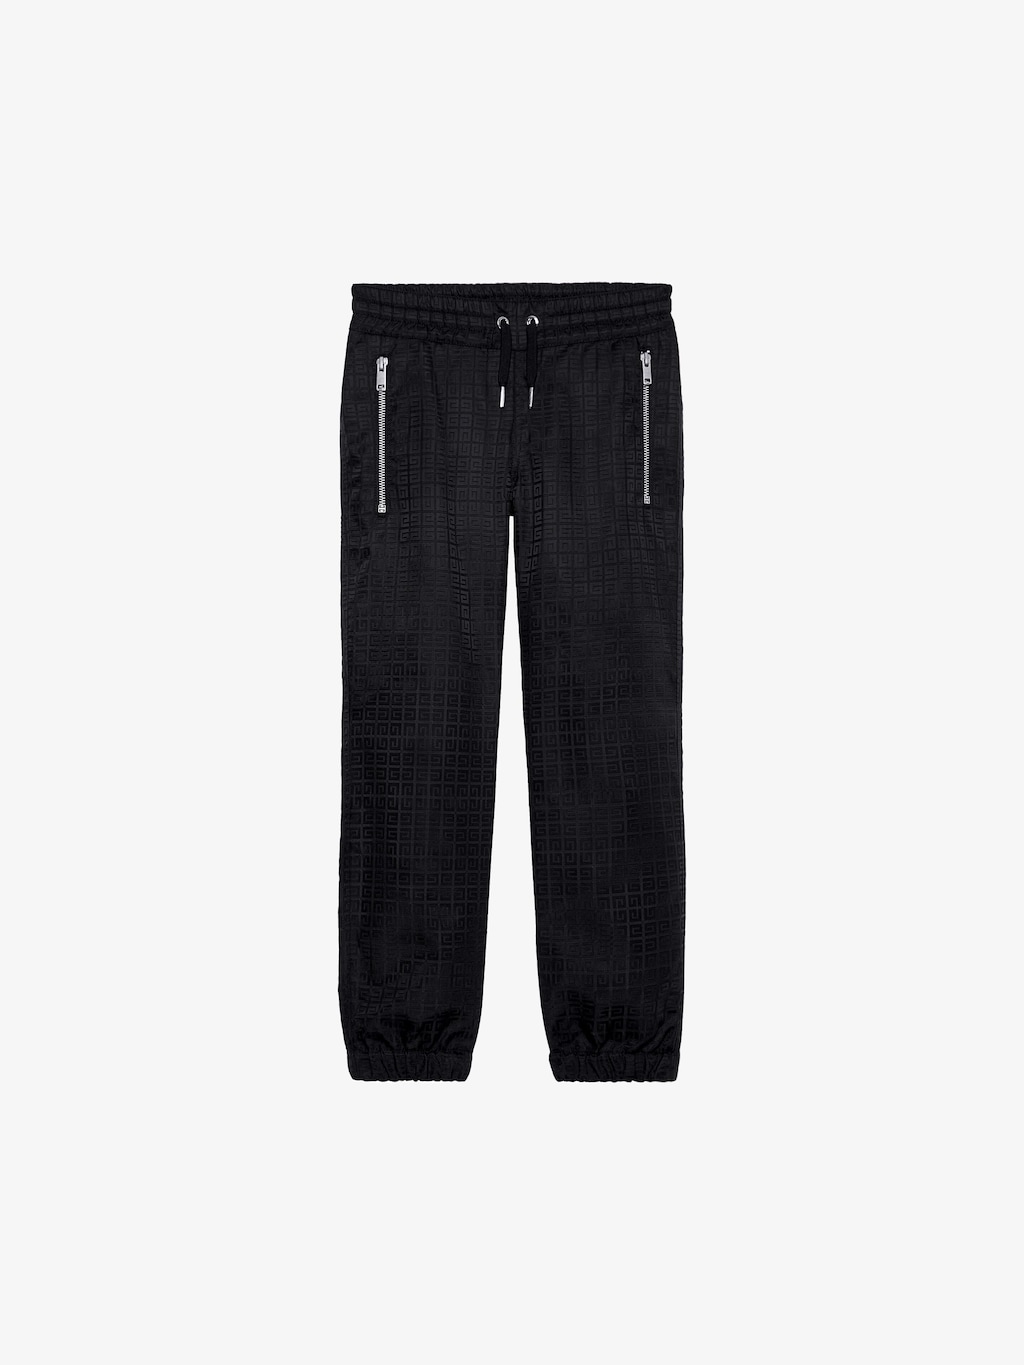 undefined | Jogger pants in 4G nylon